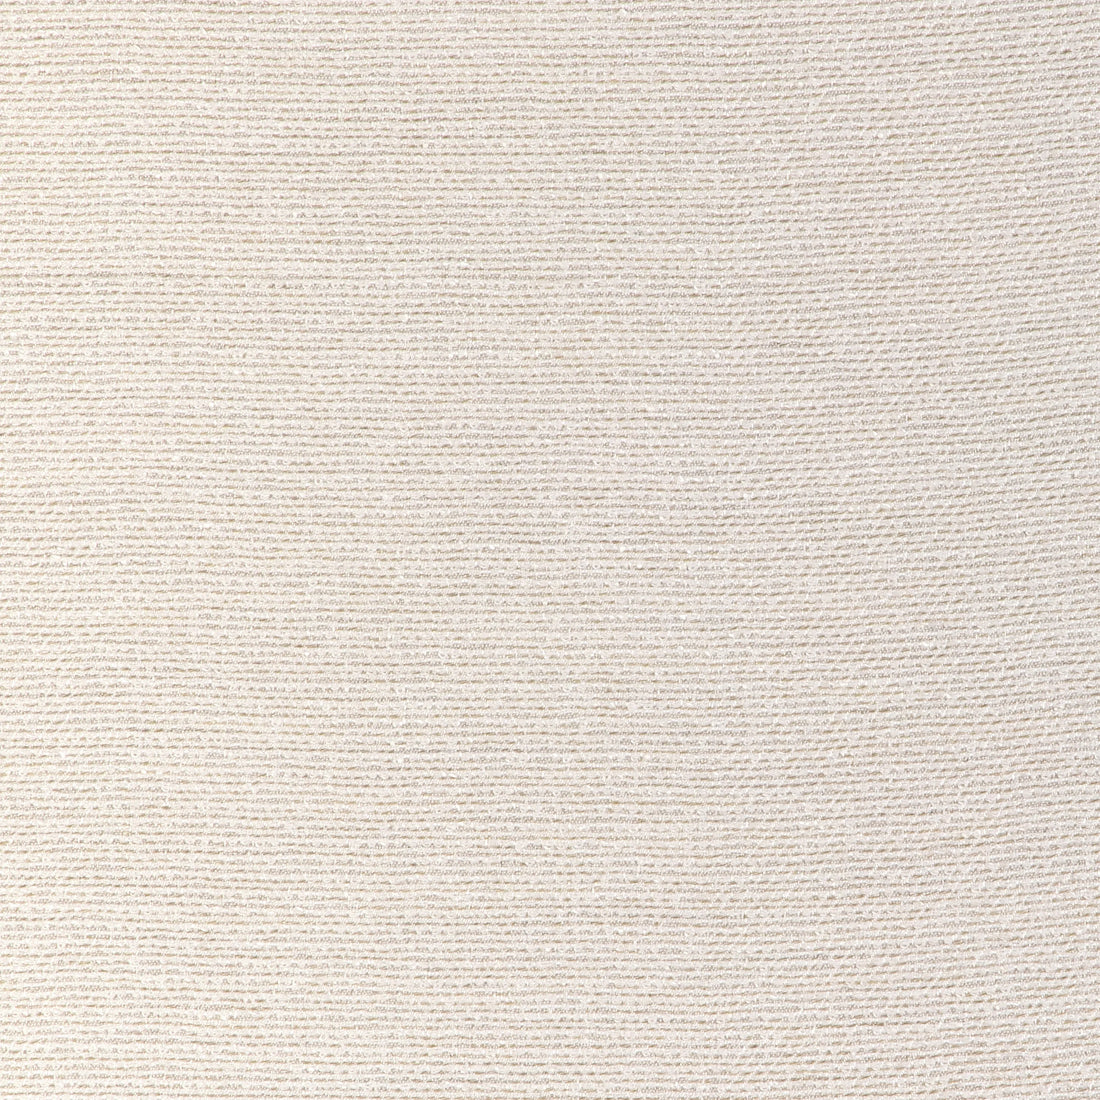 Chatham Texture fabric in sand color - pattern 36935.116.0 - by Kravet Couture in the Riviera collection